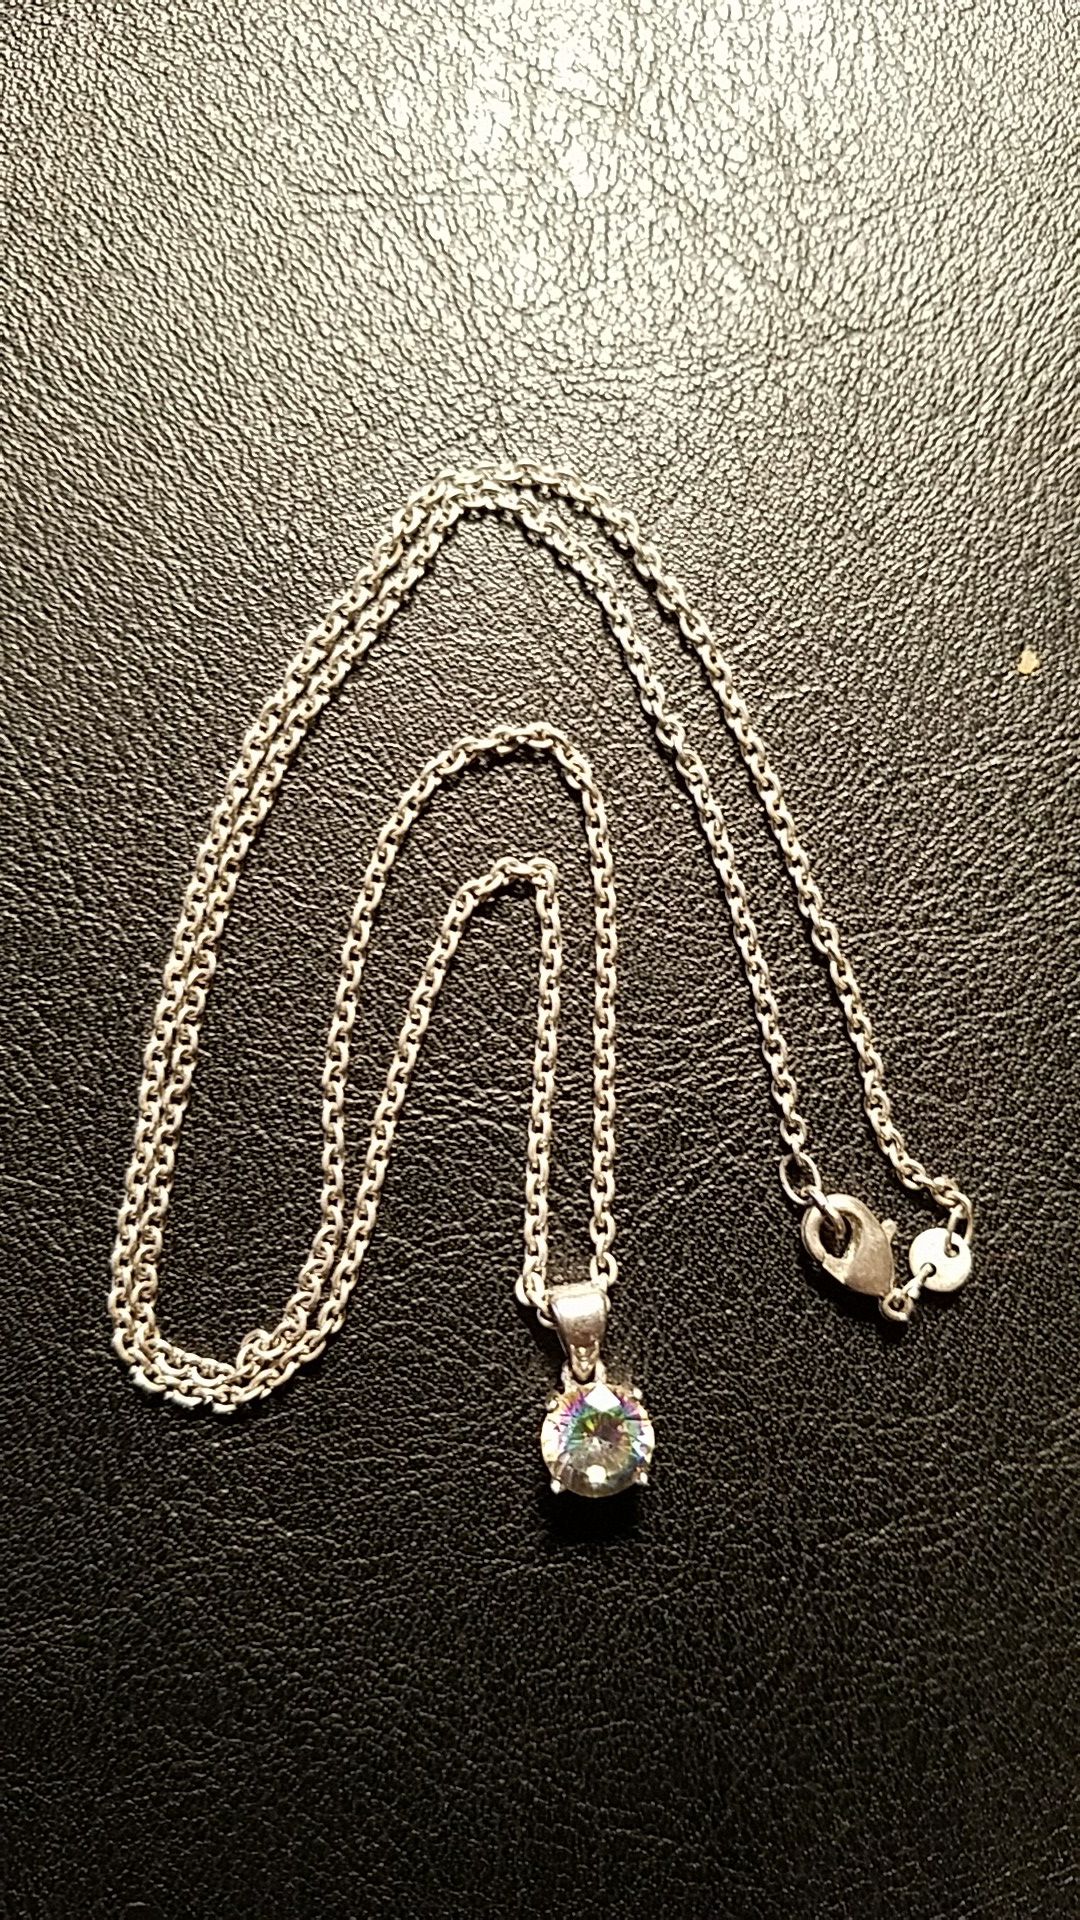 18 inch necklace with silver charm with stone setting